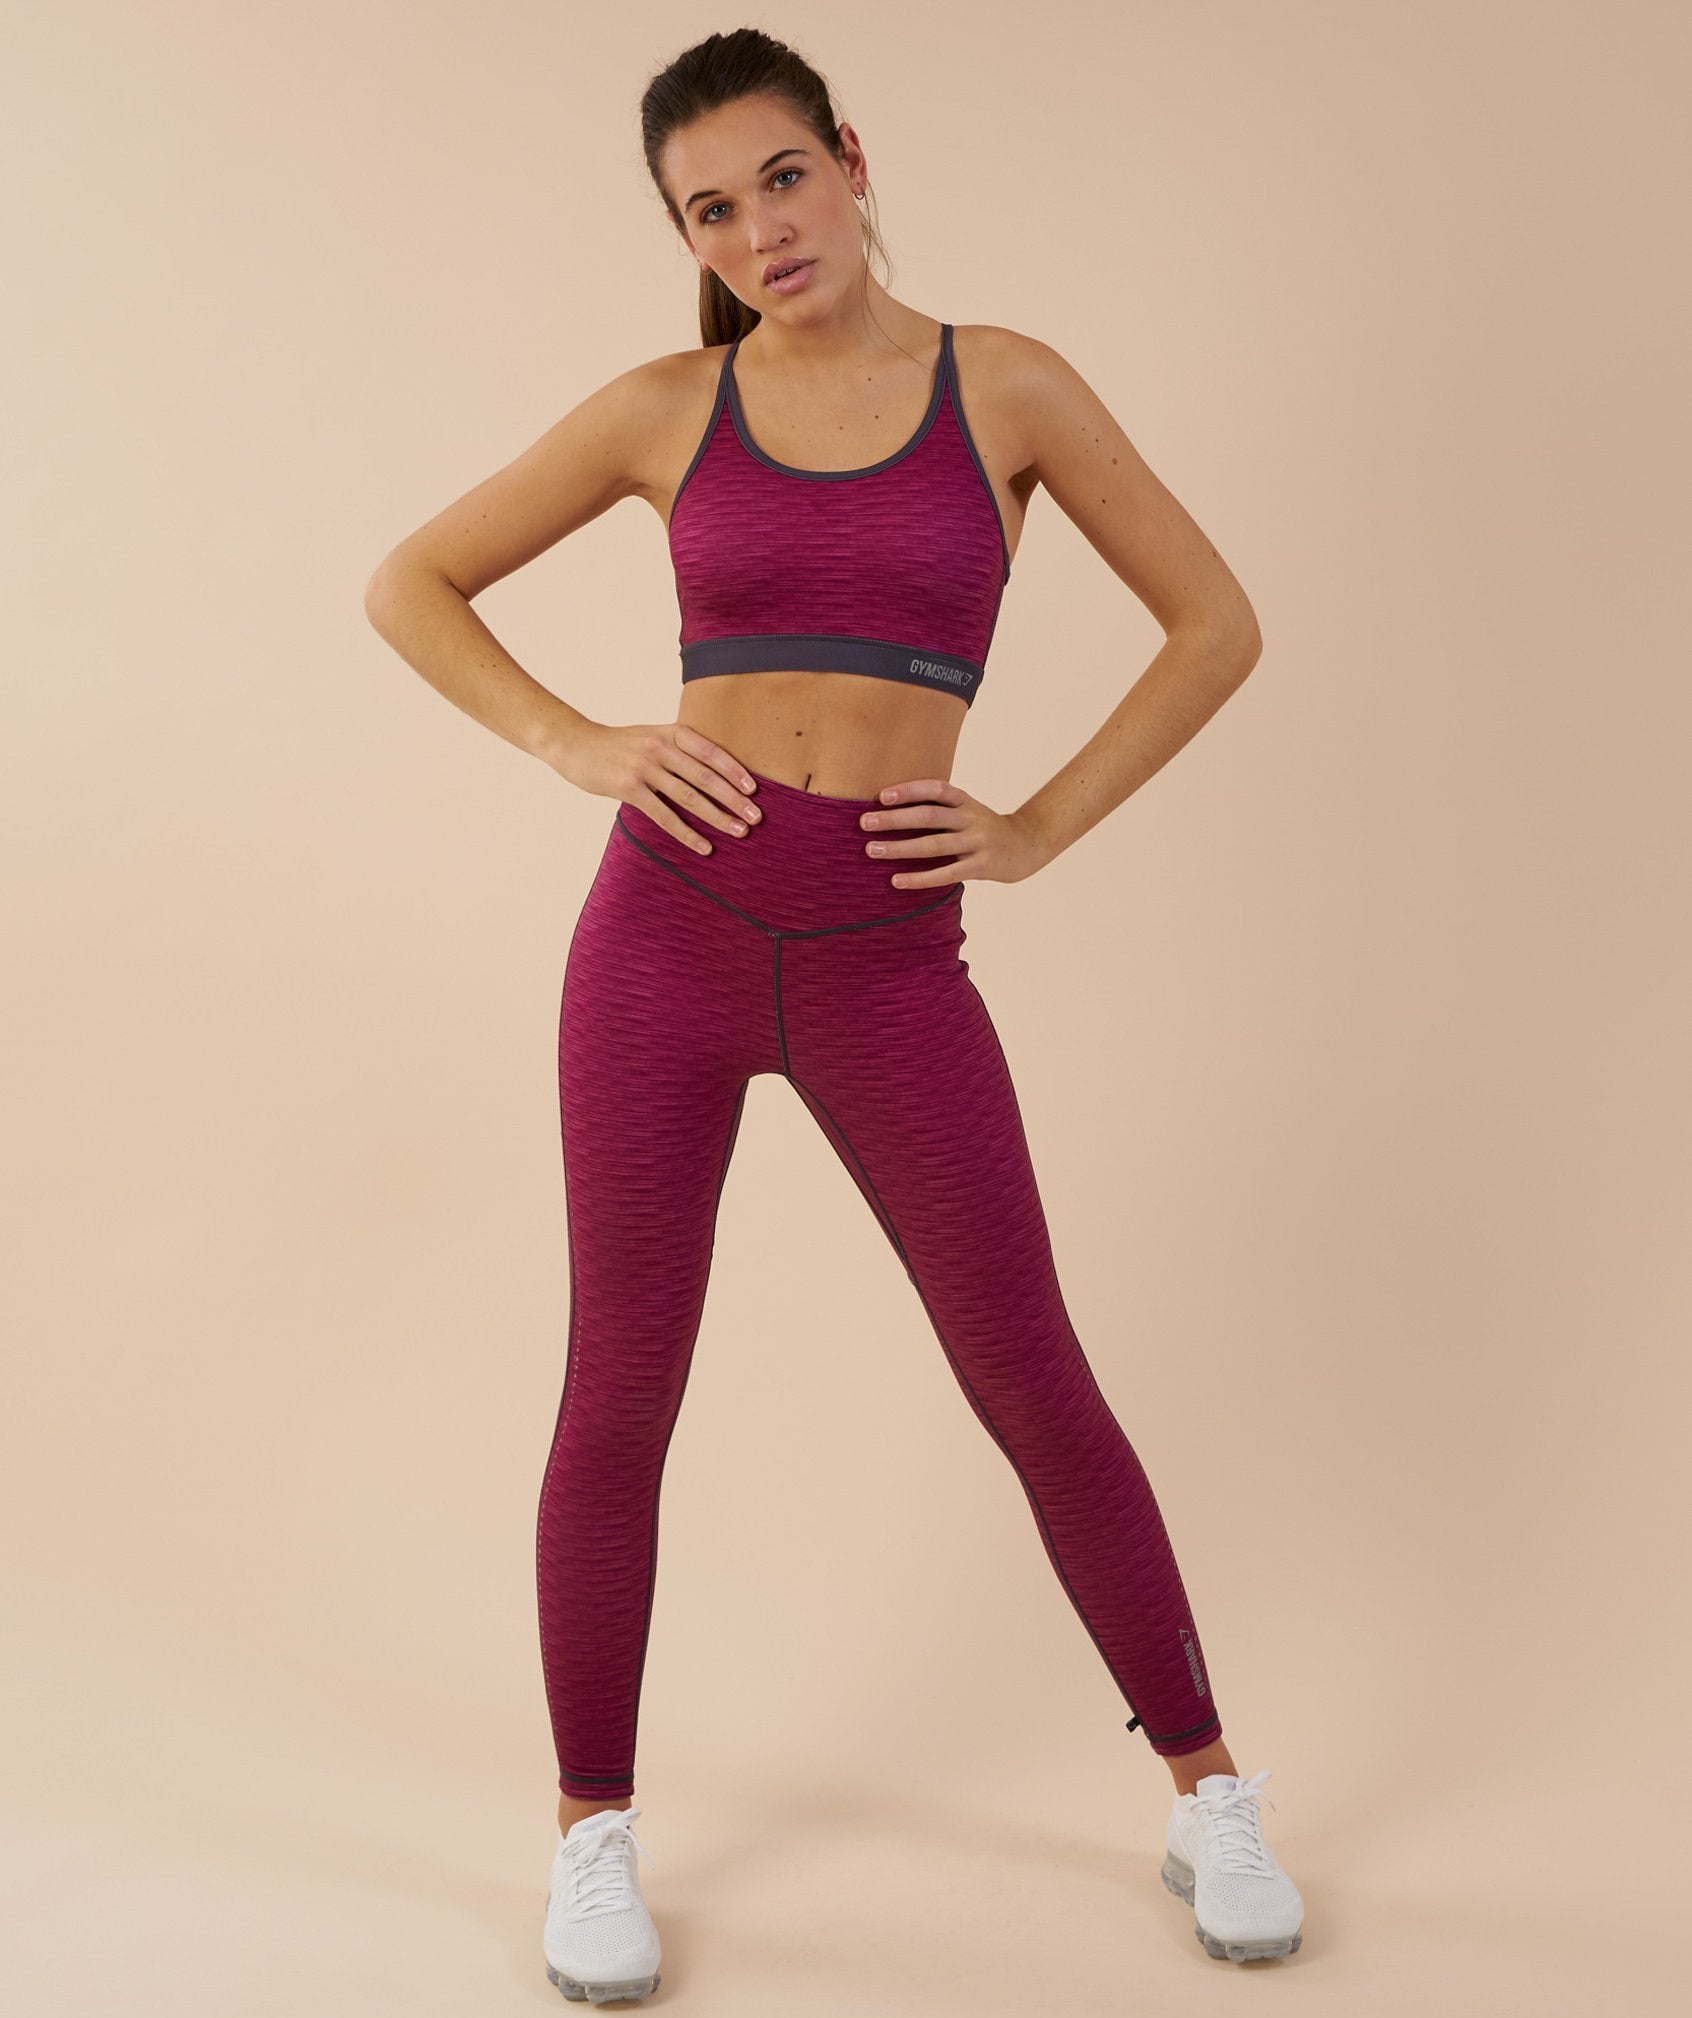 Reversible Contrast Sports Bra in Charcoal Marl/Beet - view 1